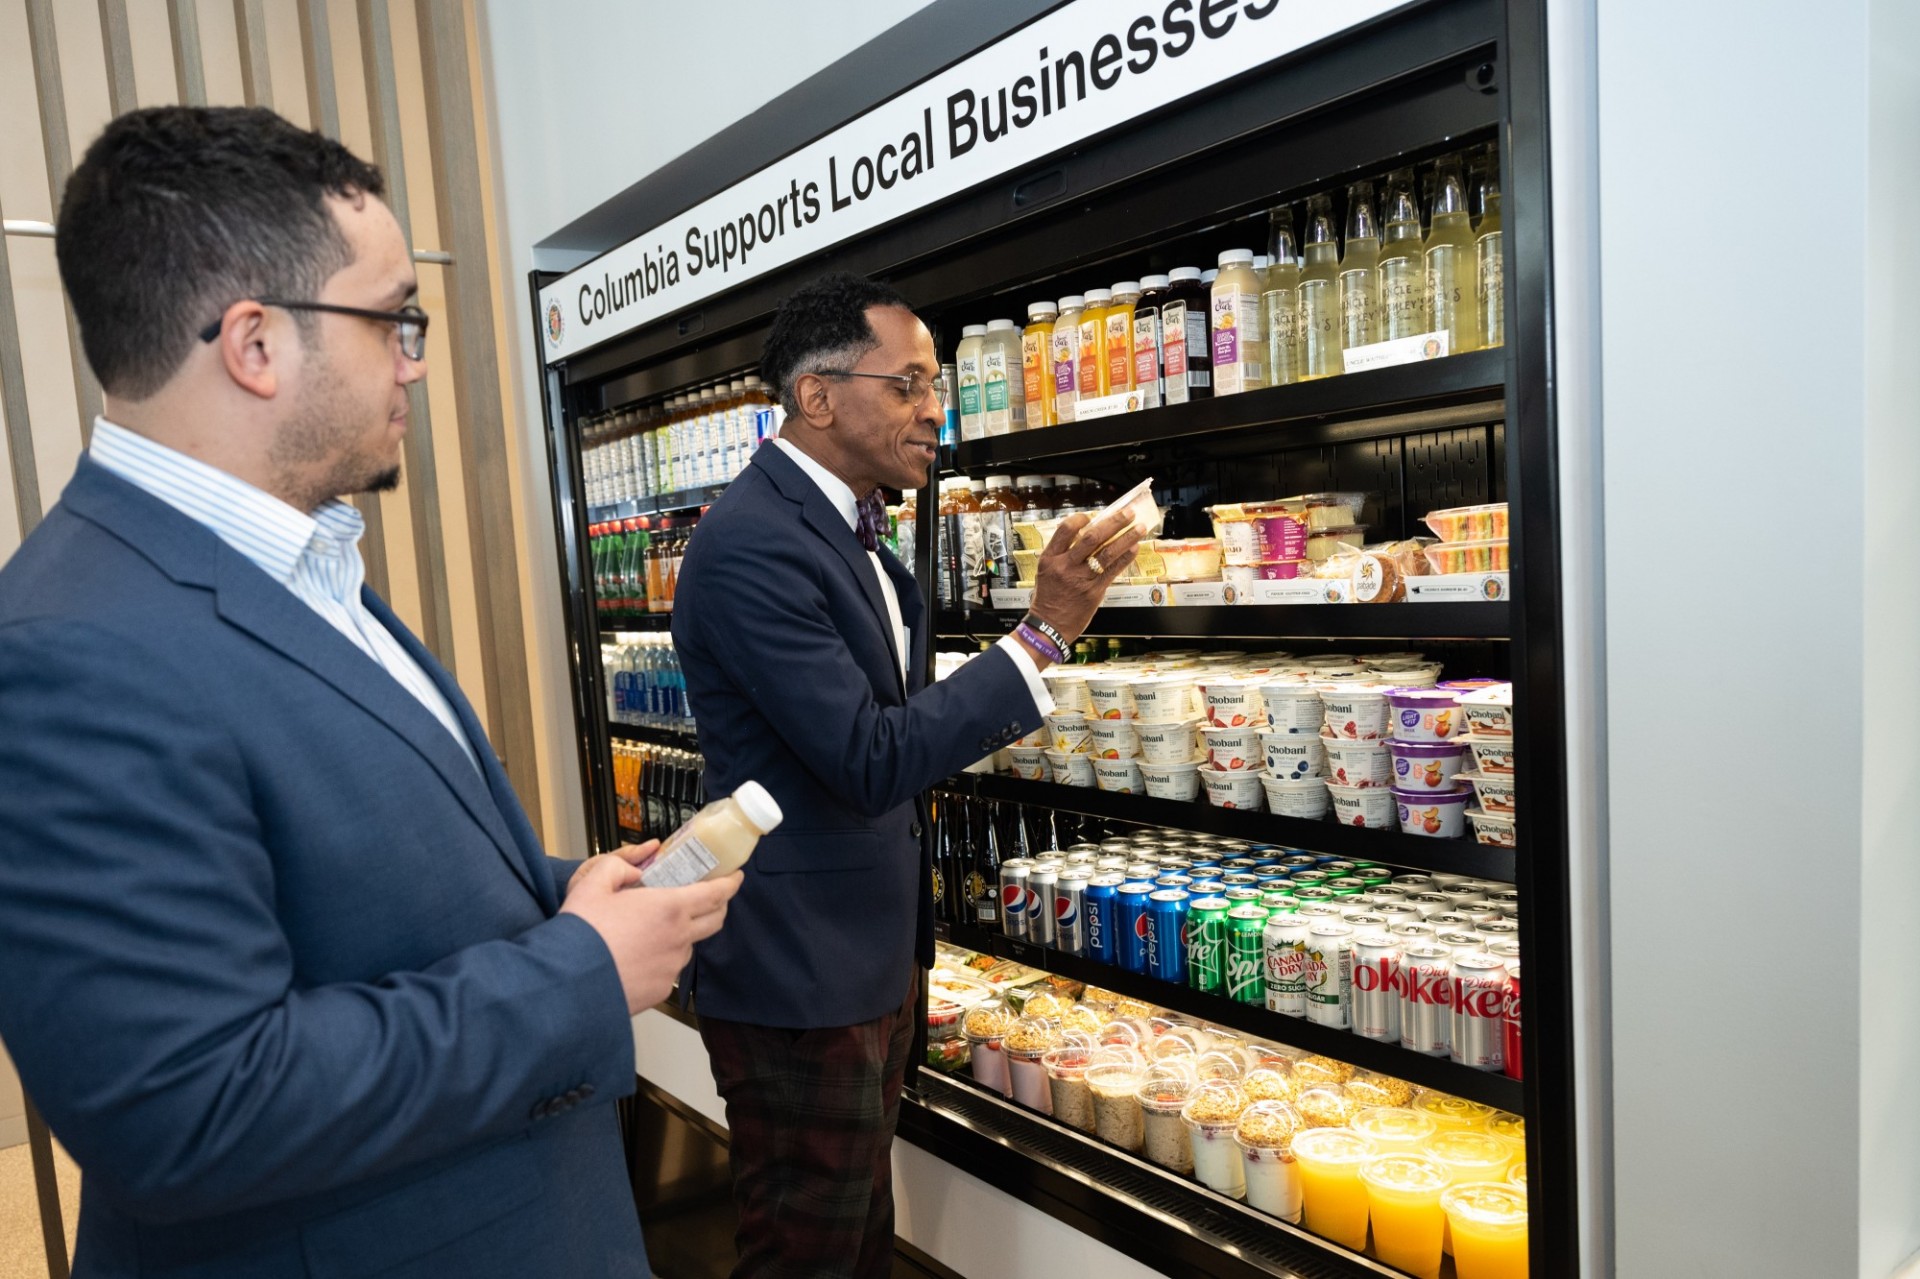 City Council Member Shaun Abreu and Assembly Member Al Taylor inspect the local vendors on display in the café on the ground floor of David Geffen Hall. Photo by Diane Bondareff.